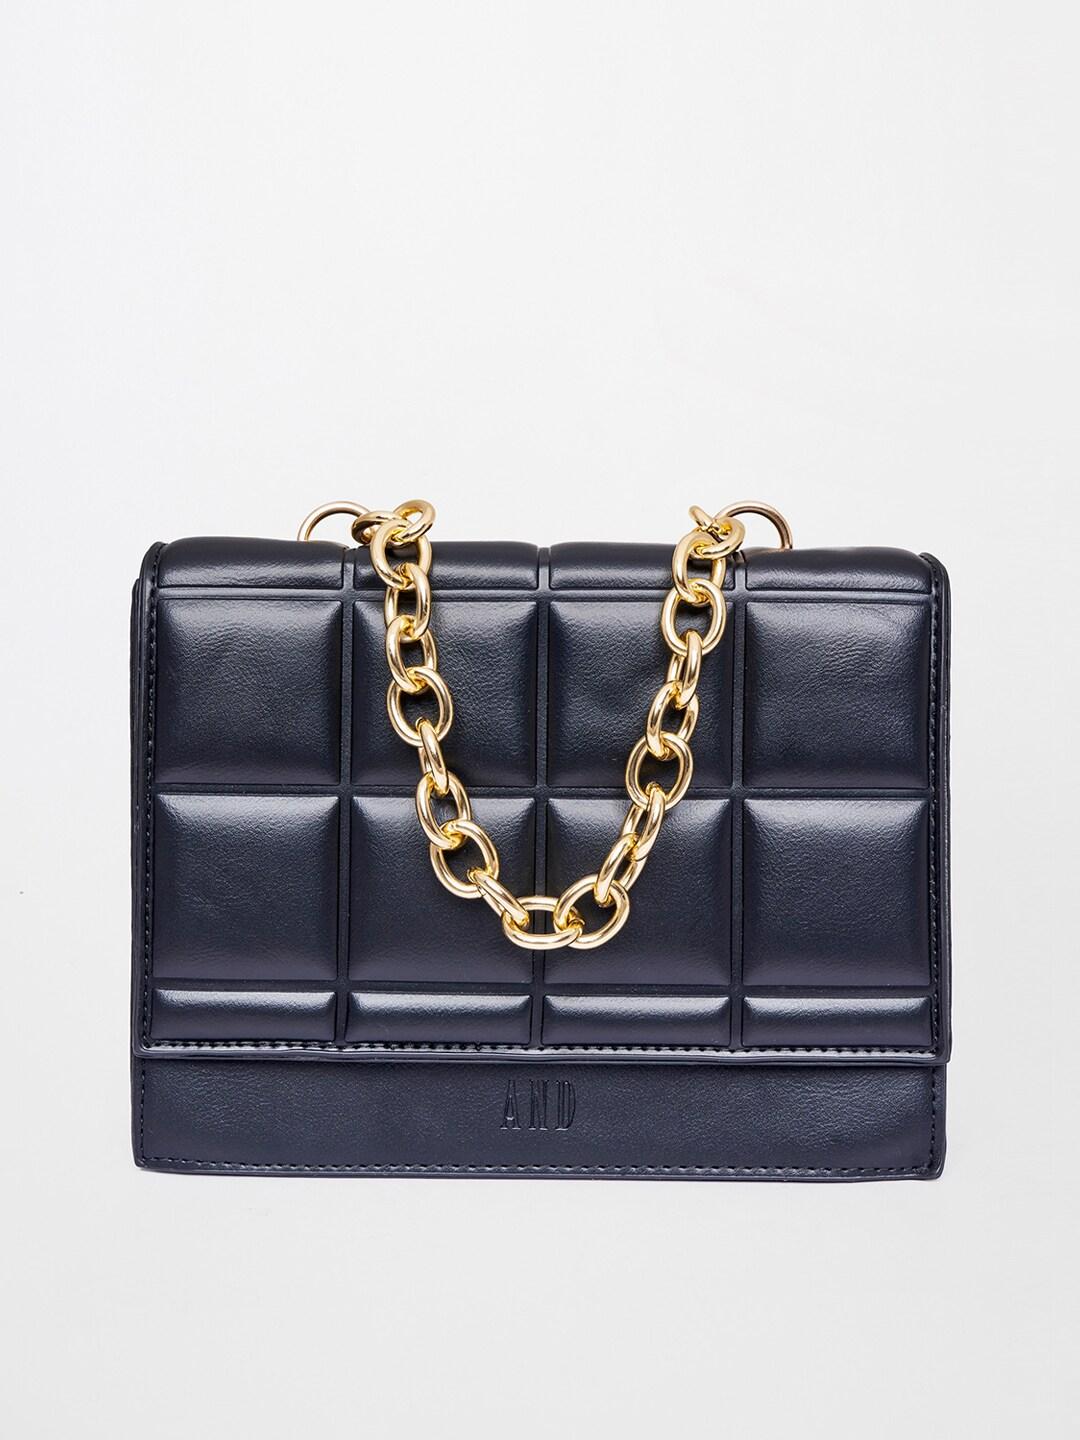 AND Black PU Structured Handheld Bag with Tasselled